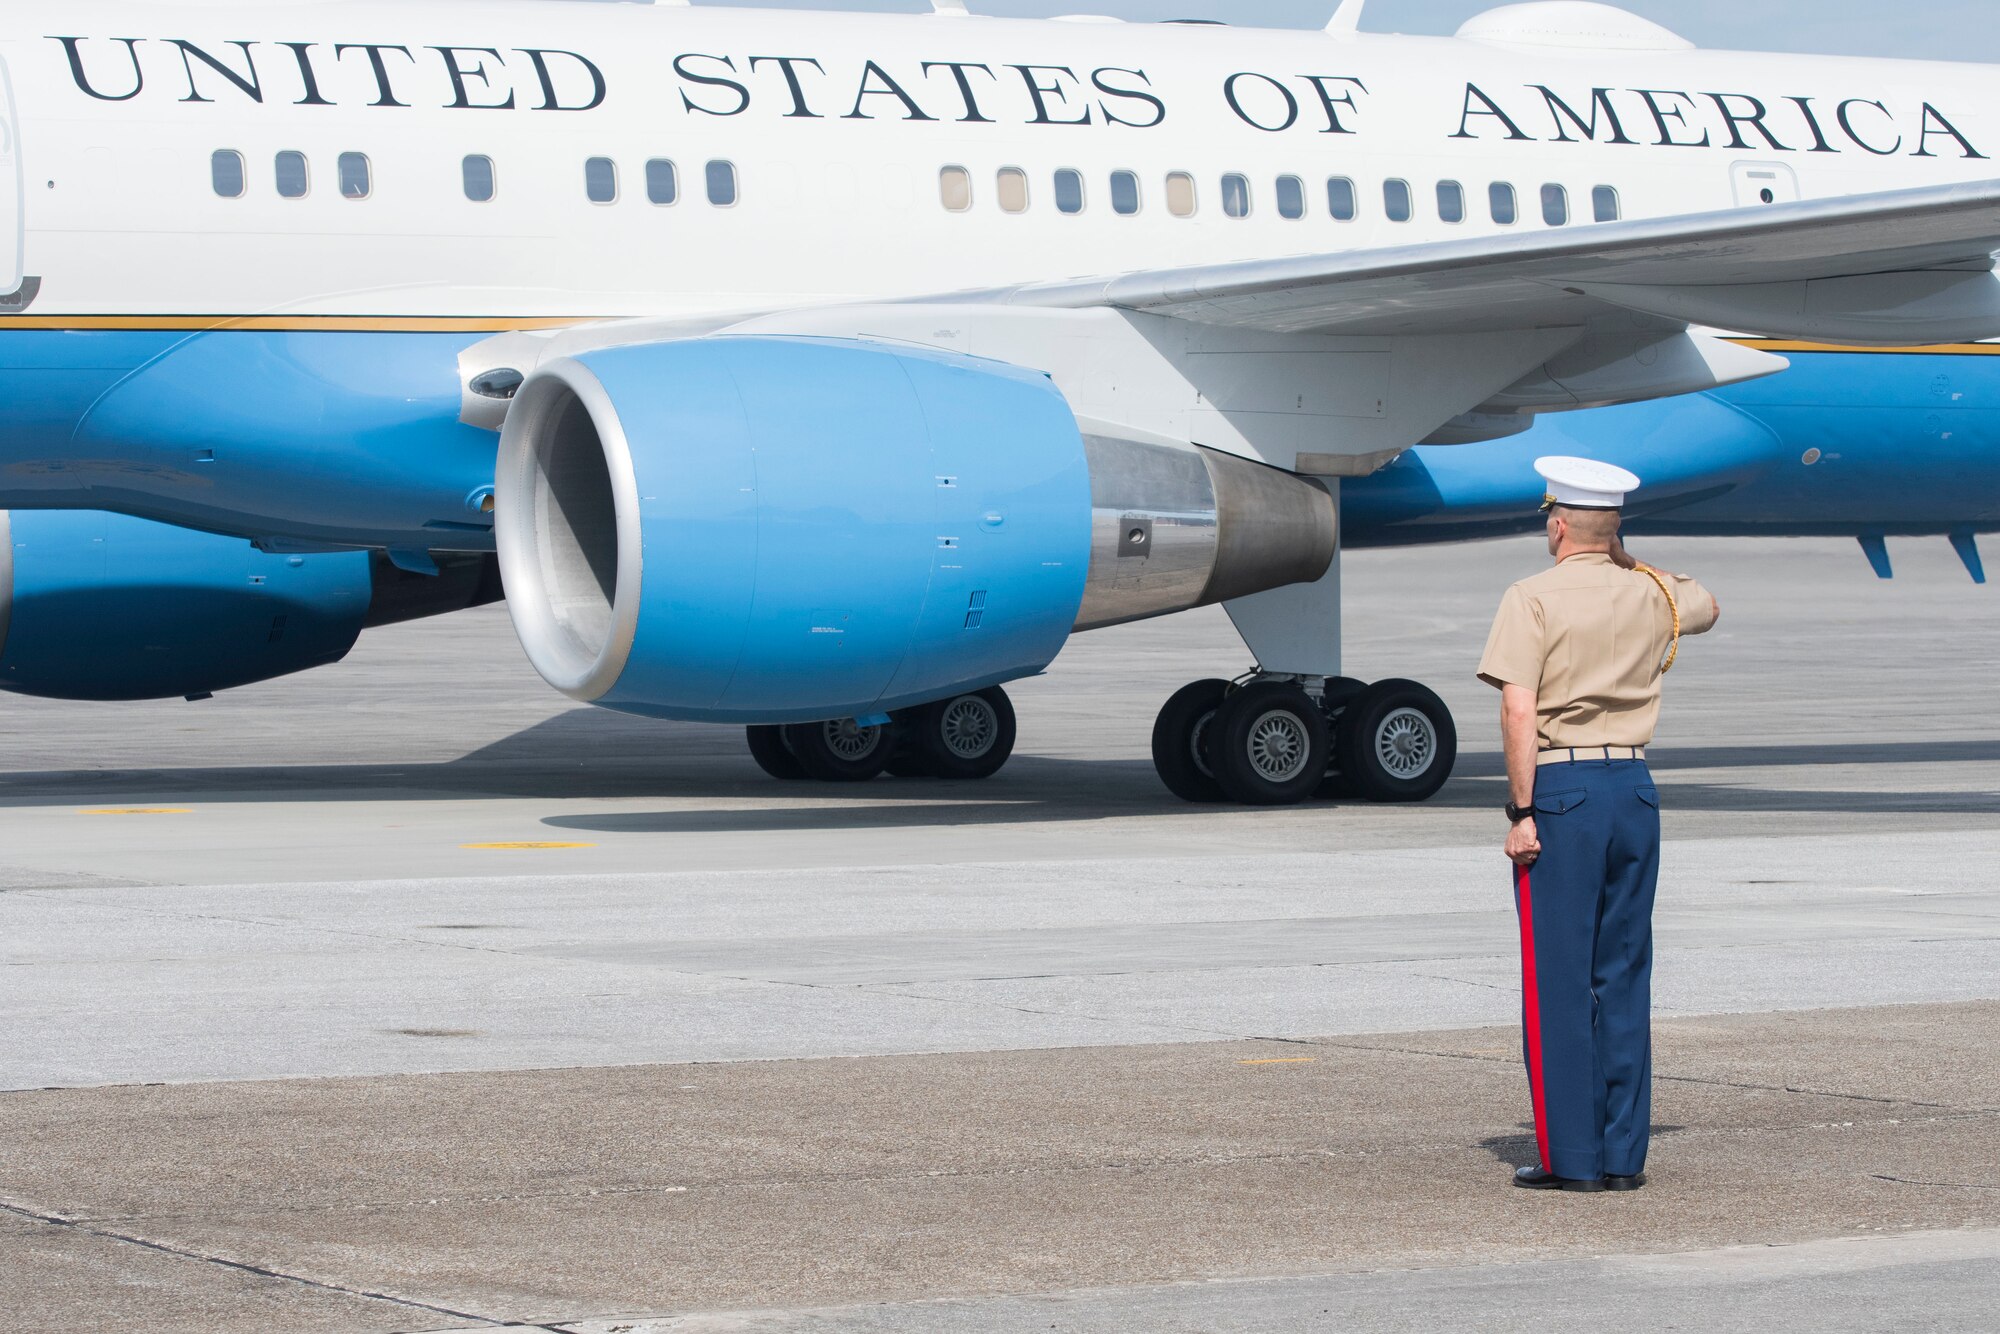 A Marine salutes Air Force Two as it taxis on the runway at Dobbins Air Reserve Base, Ga. May 29, 2020. Air Force Two landed here around 10 a.m., marking the second time in two weeks the vice president has visited Georgia. (U.S. Air Force photo/Andrew Park)